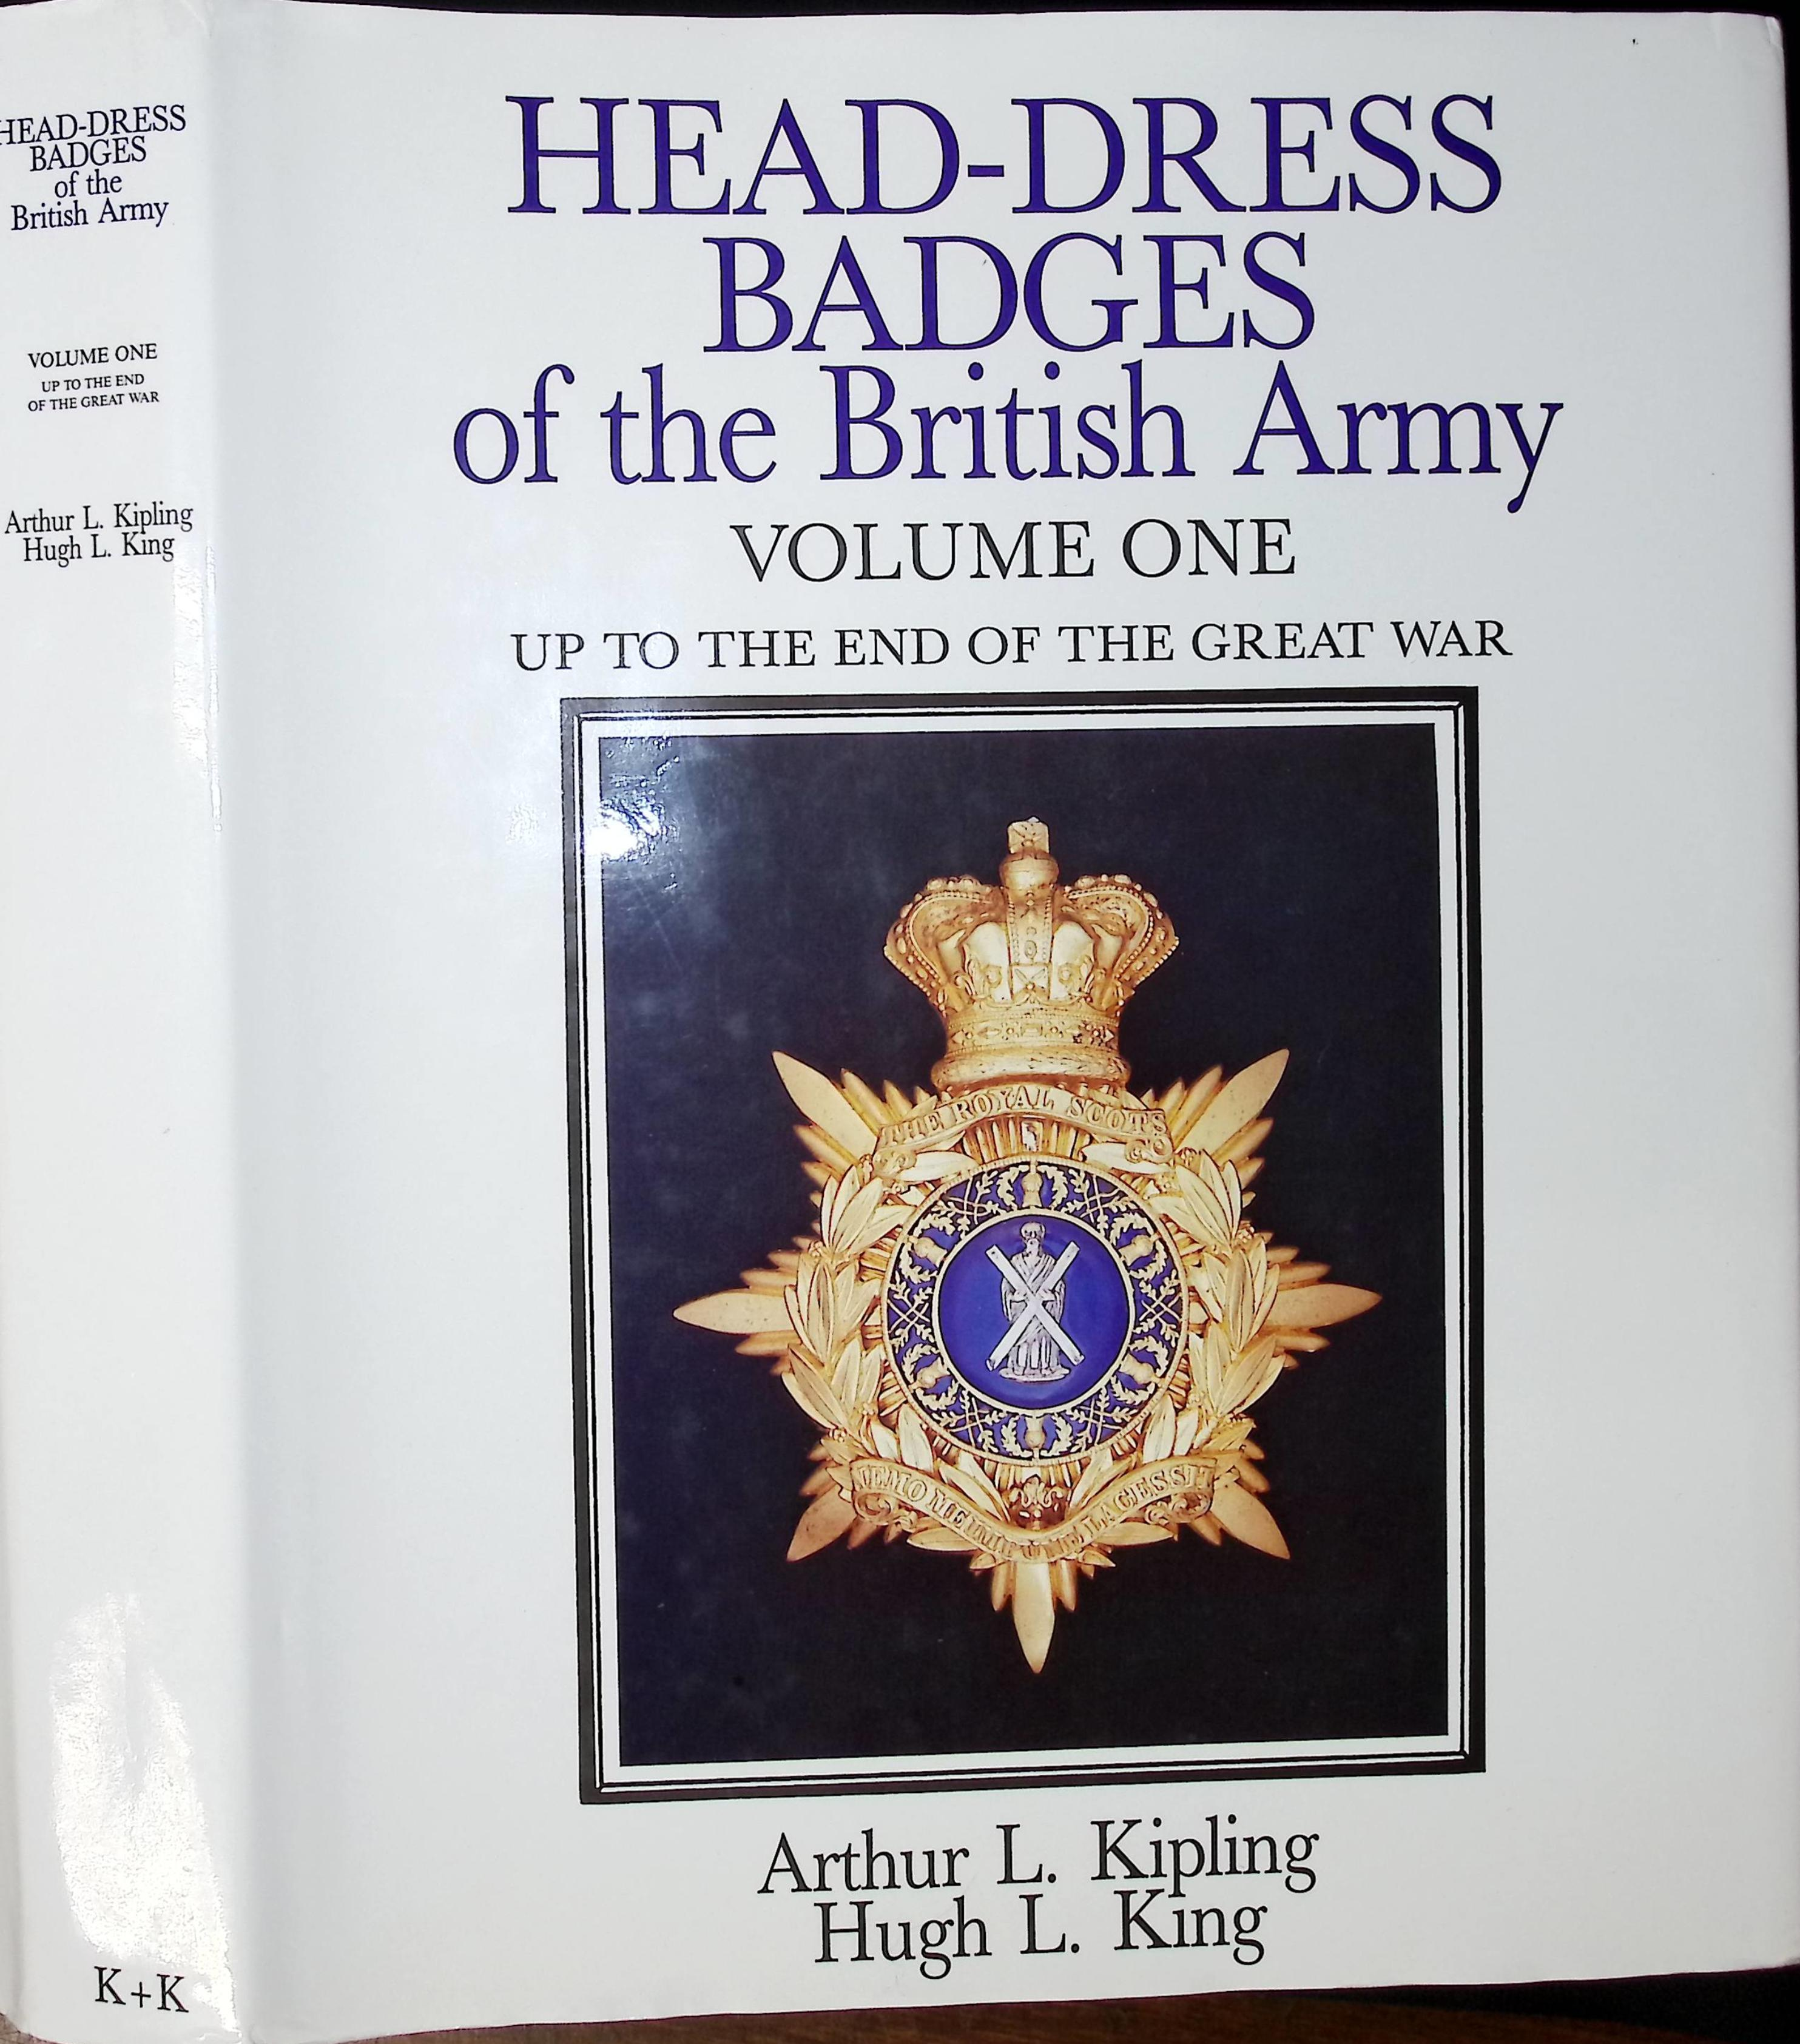 Head-Dress Badges of the British Army. Volume One. Up to the End of the Great War.